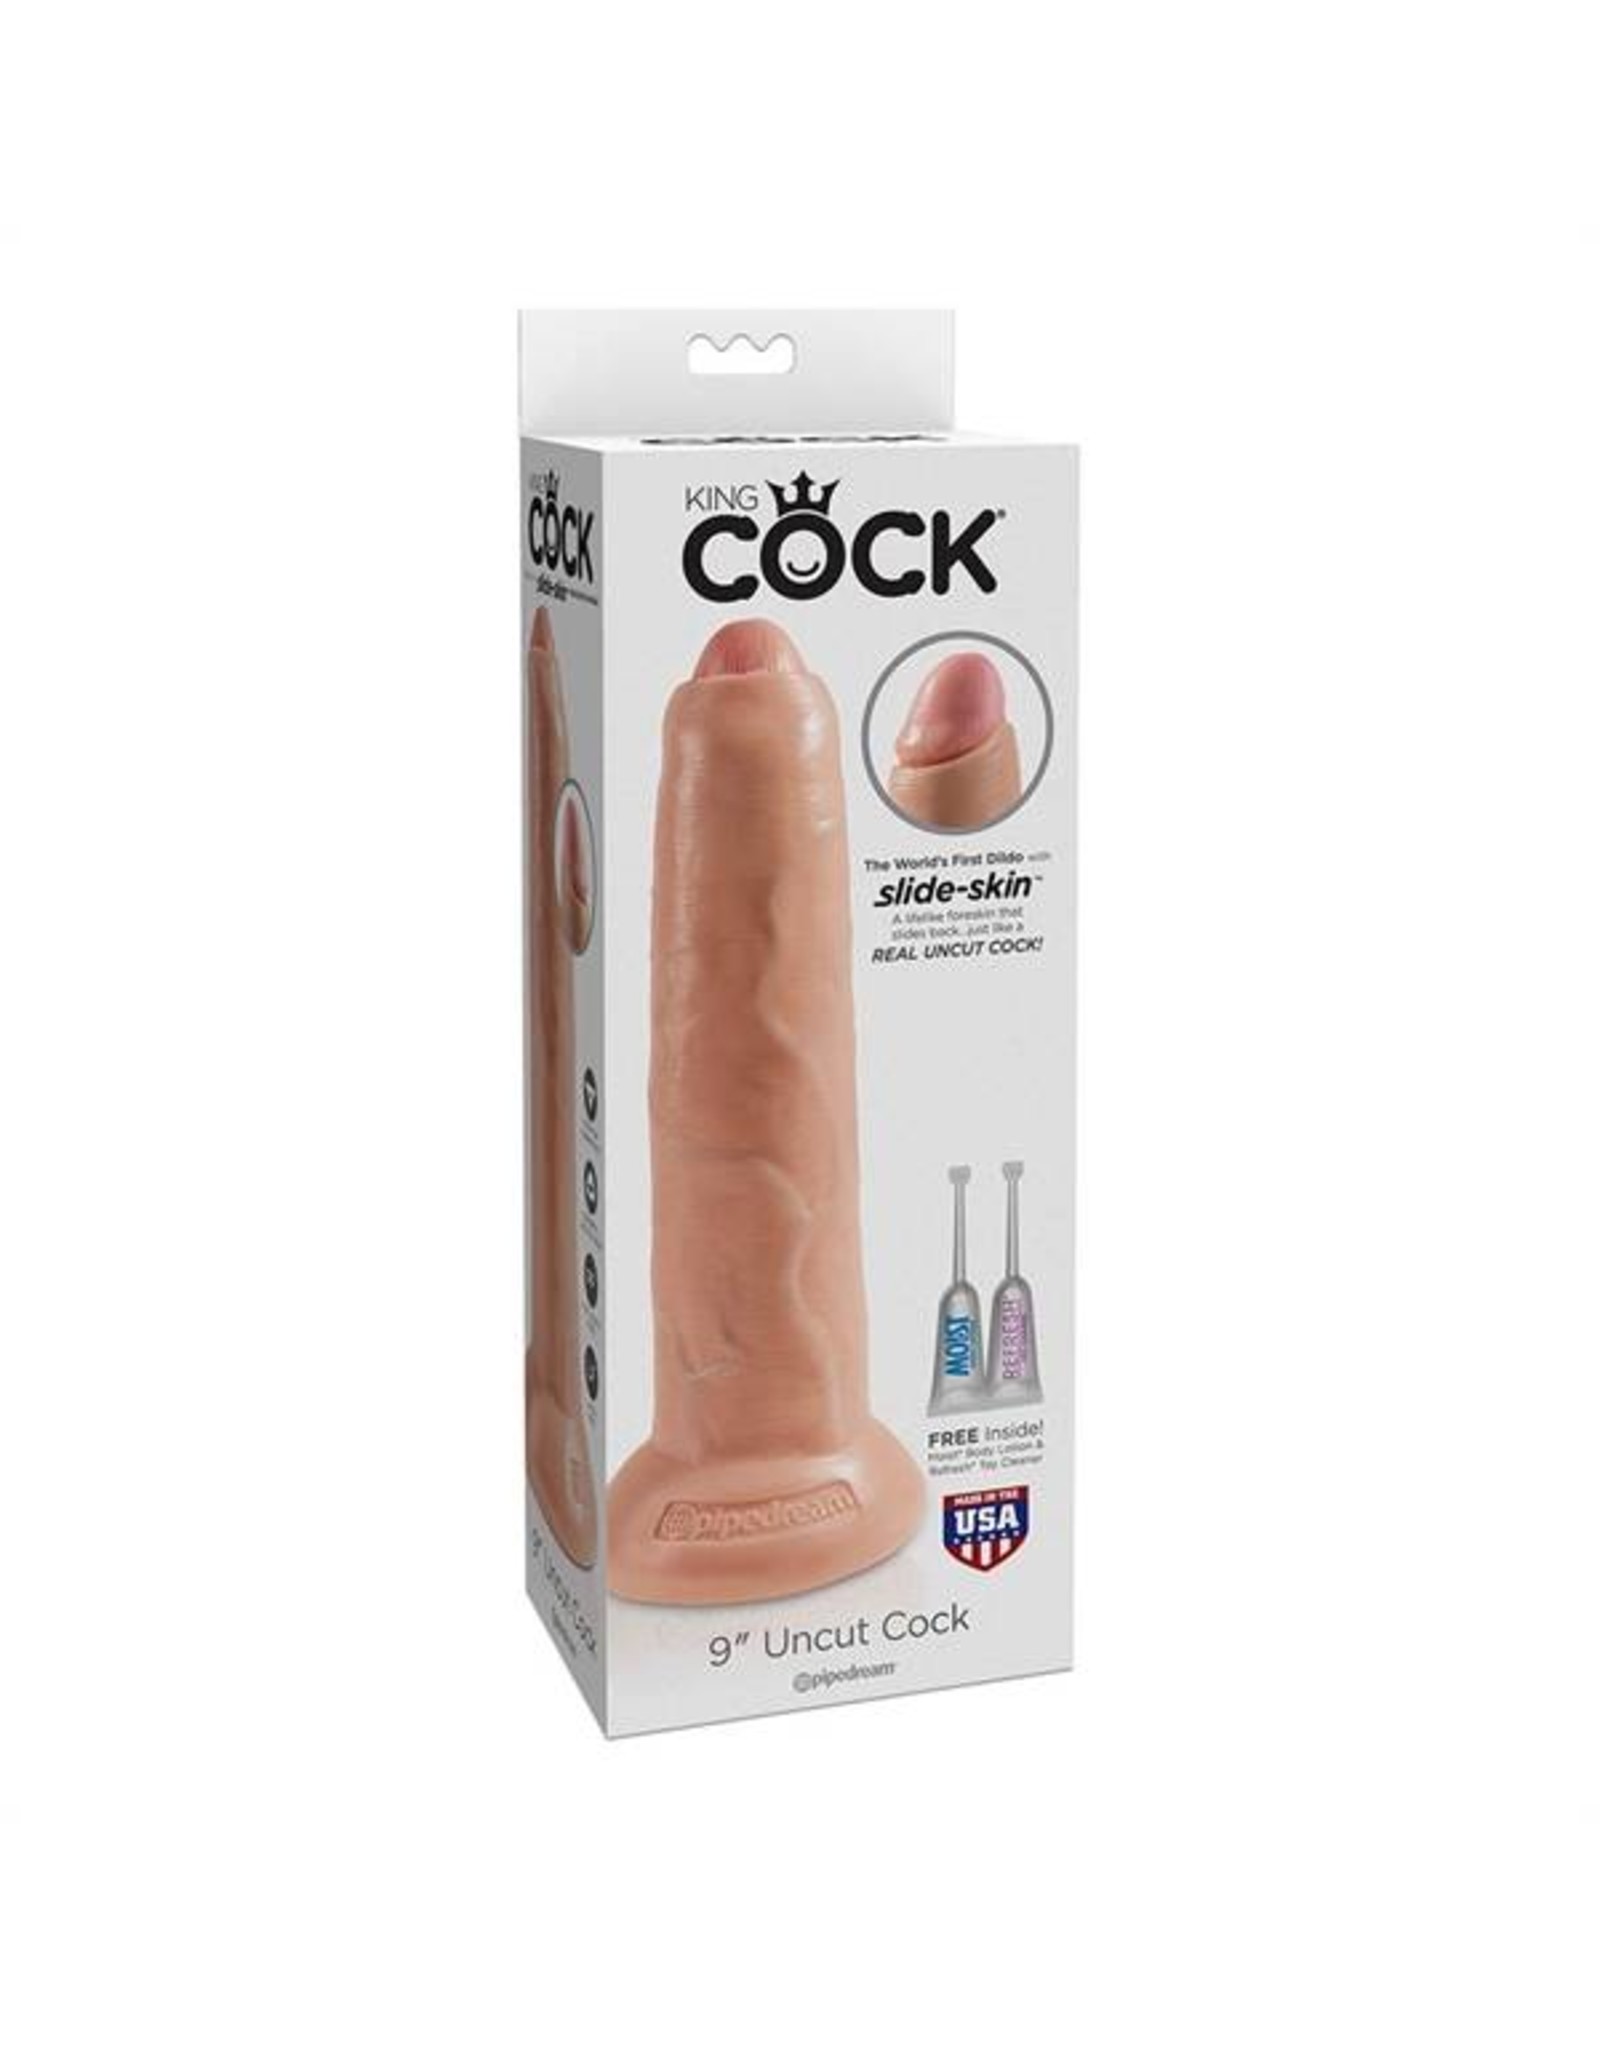 King Cock King Cock Uncut Cock 9" - nature